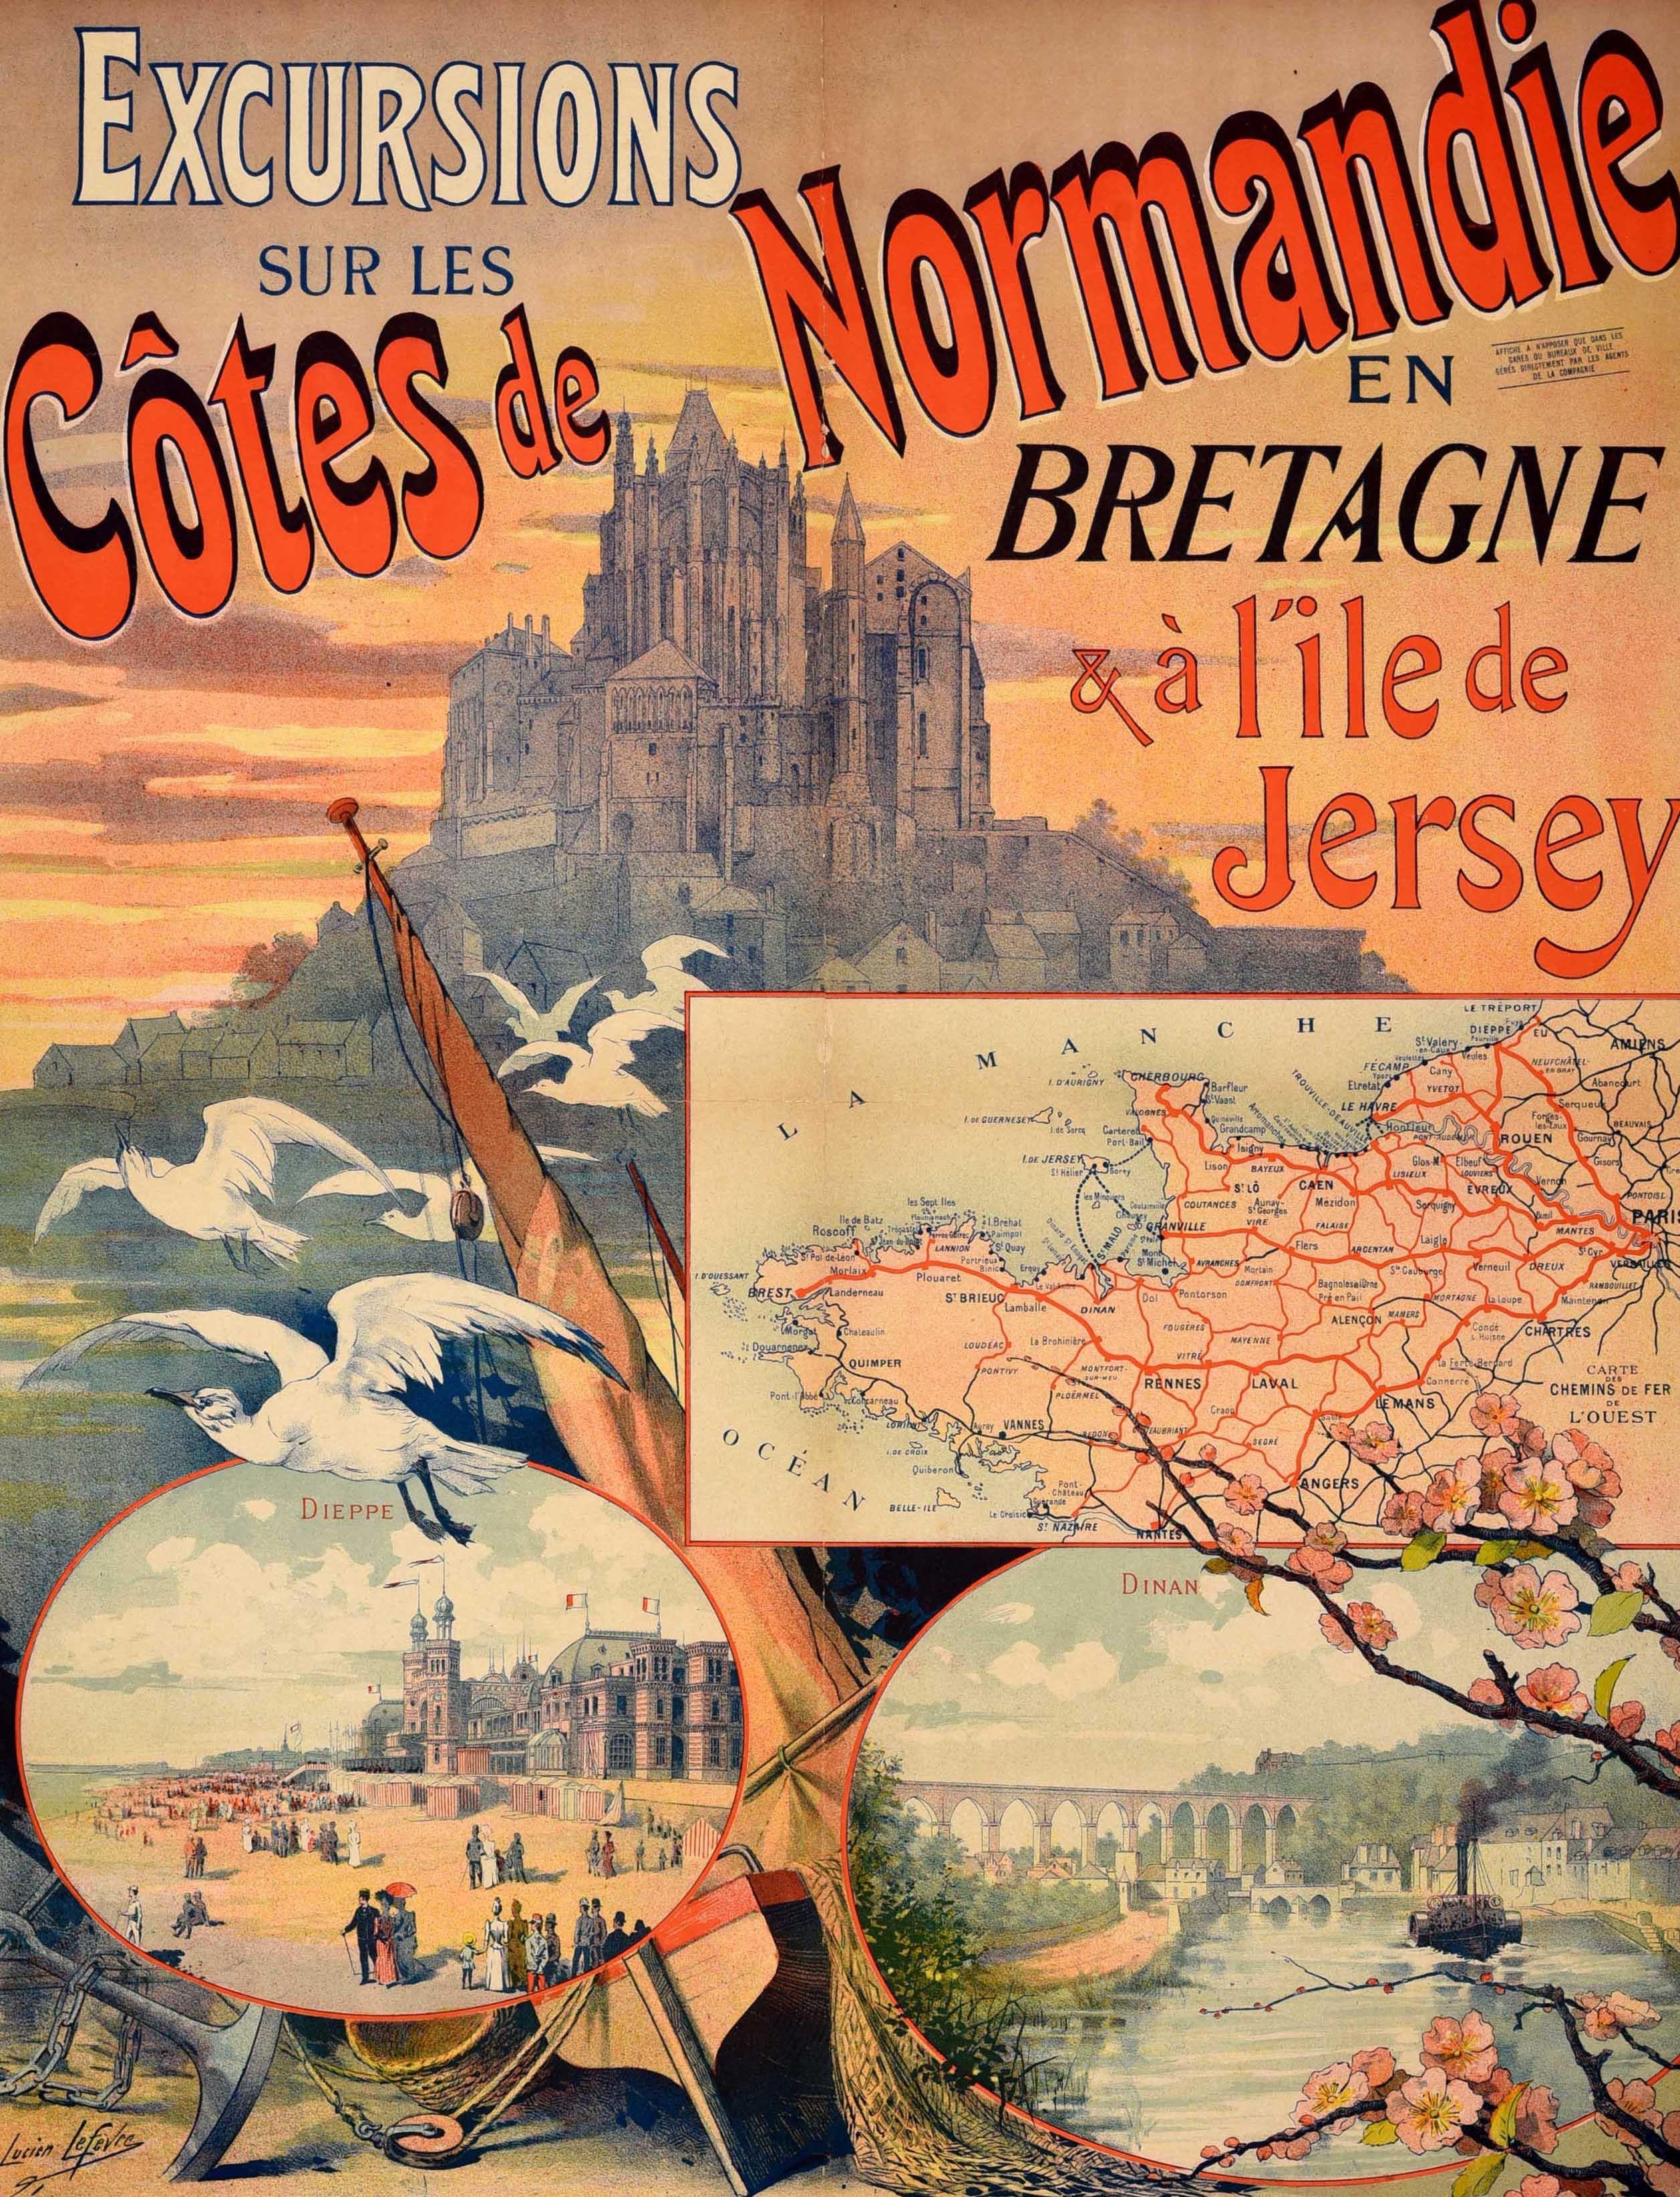 Original antique train travel poster for Excursions On The Coasts of Normandy in Brittany & the Island of Jersey / Excursions Sur Les Cotes de Normandie en Bretagne & a l'Ile de Jersey featuring artwork by Lucien Lefevre (1850-1902) depicting the